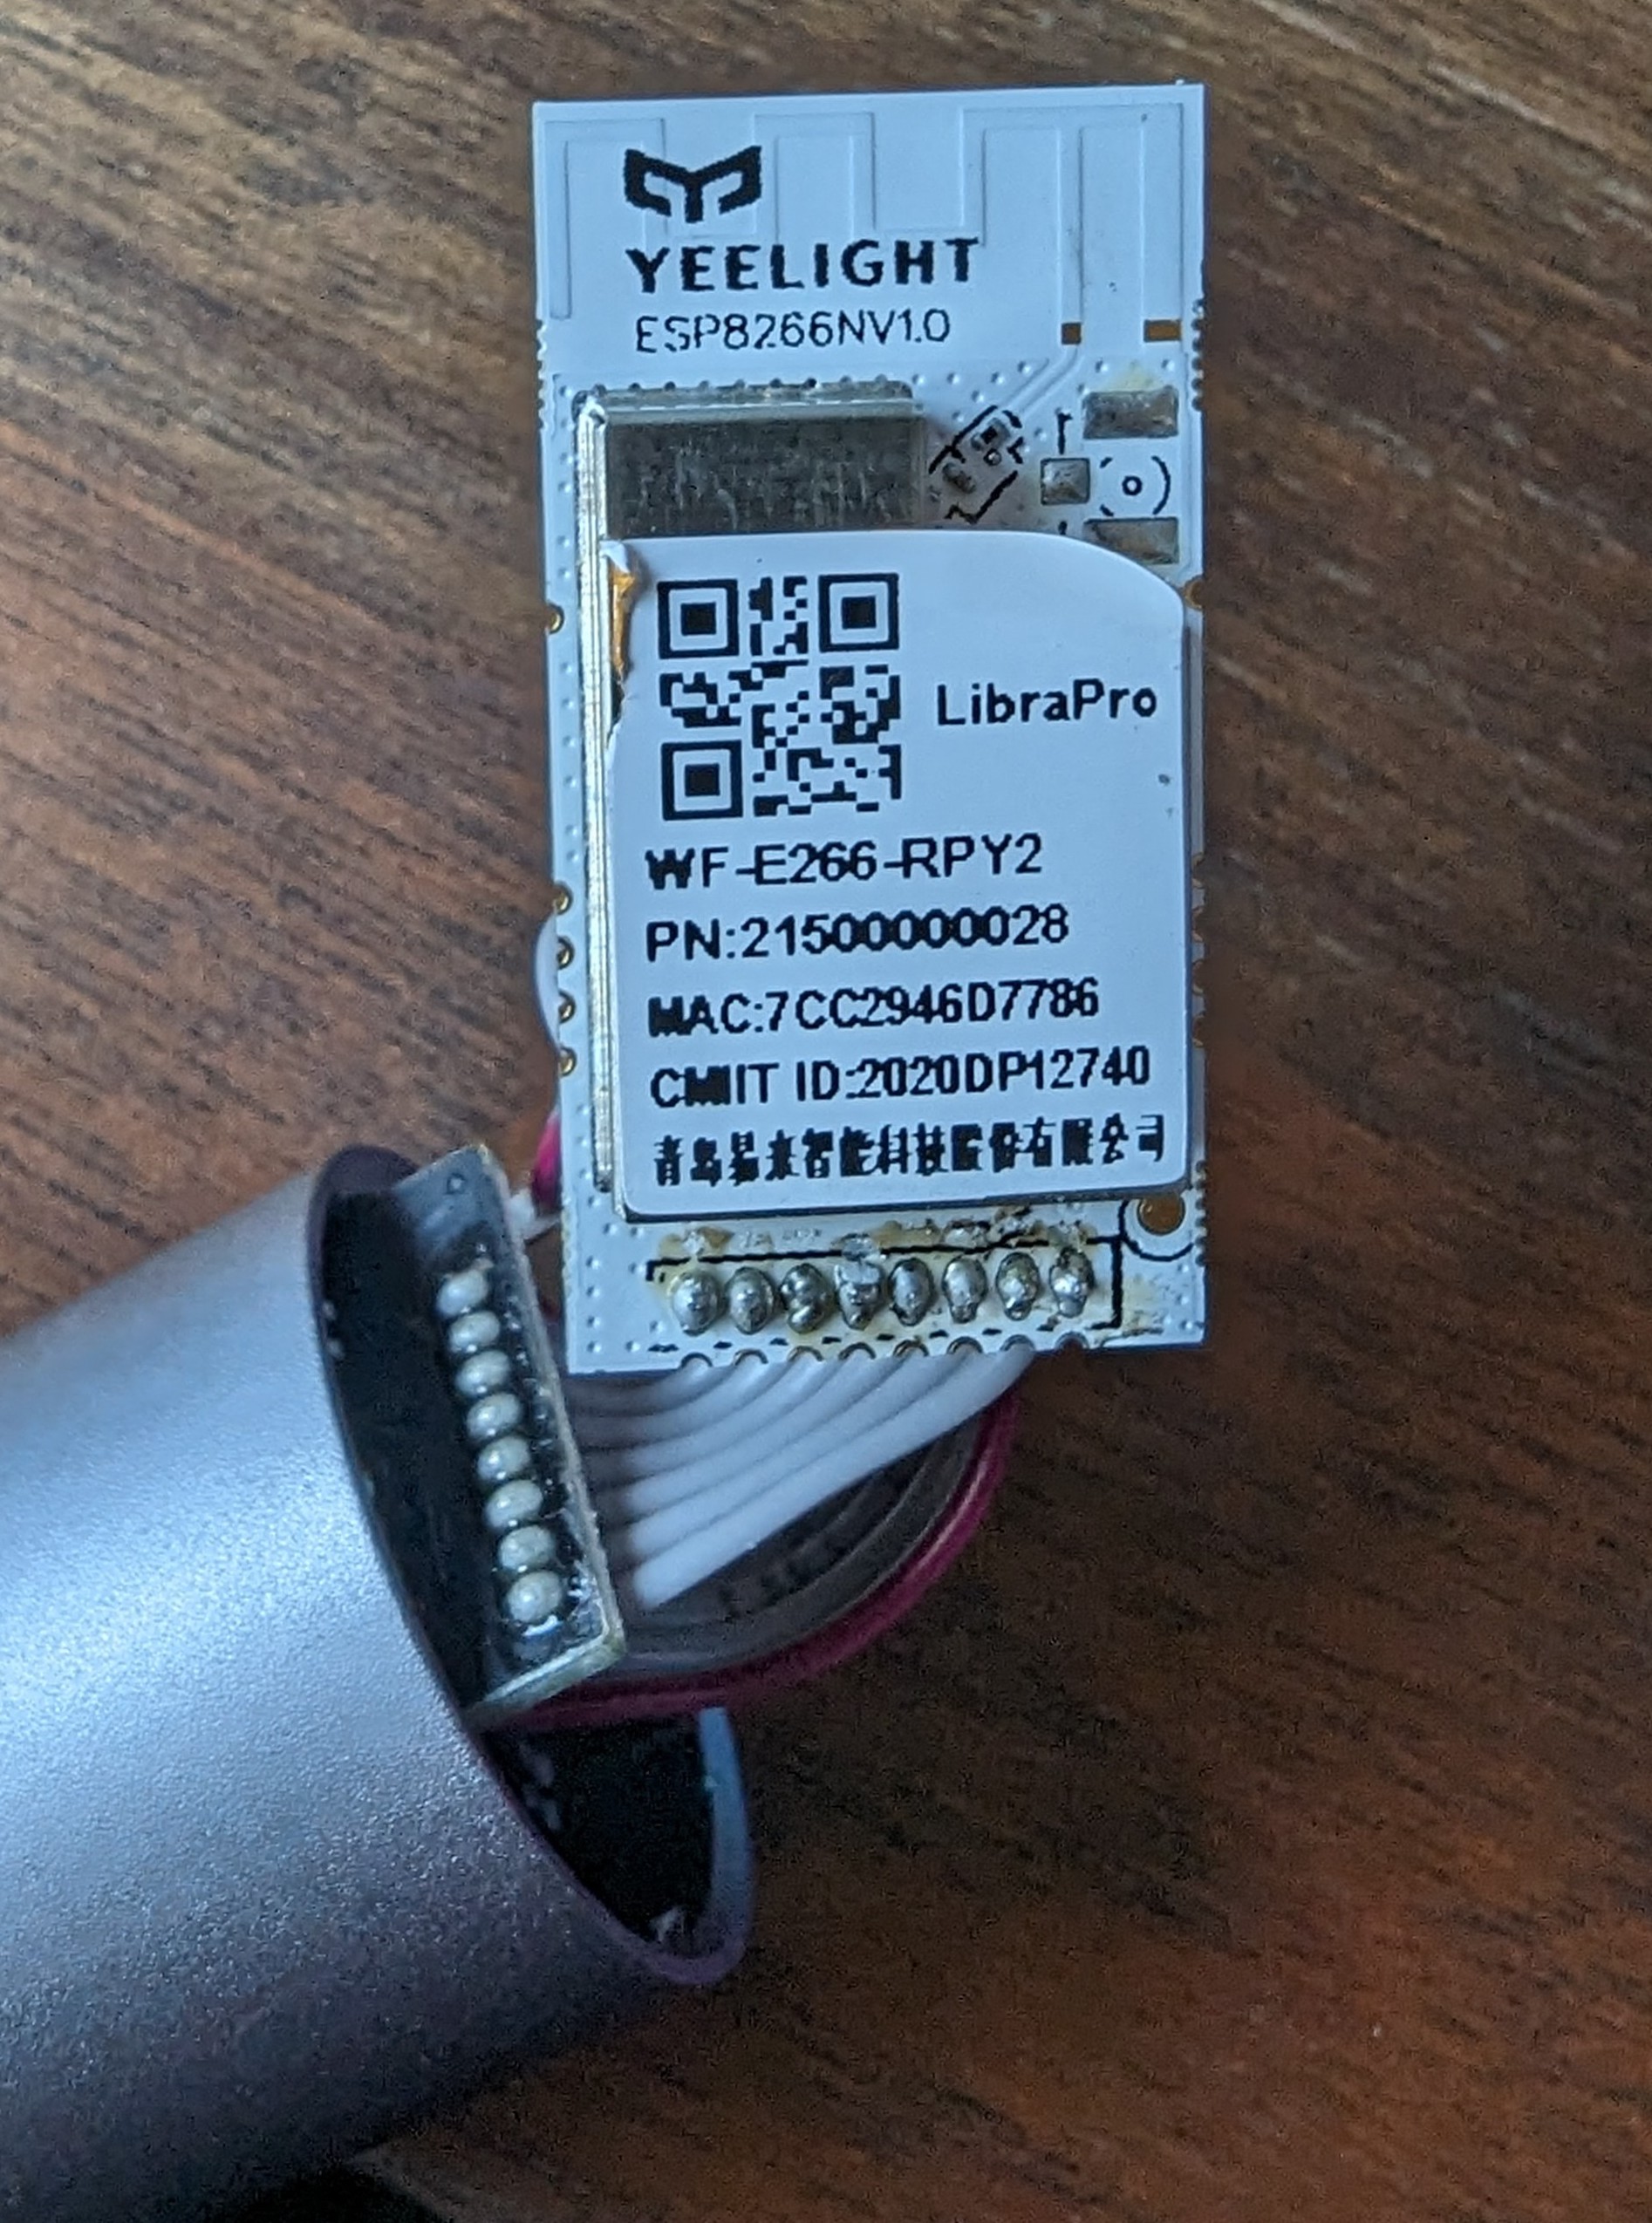 Picture showing closeup of the ESP8266 module that shipped with the lamp